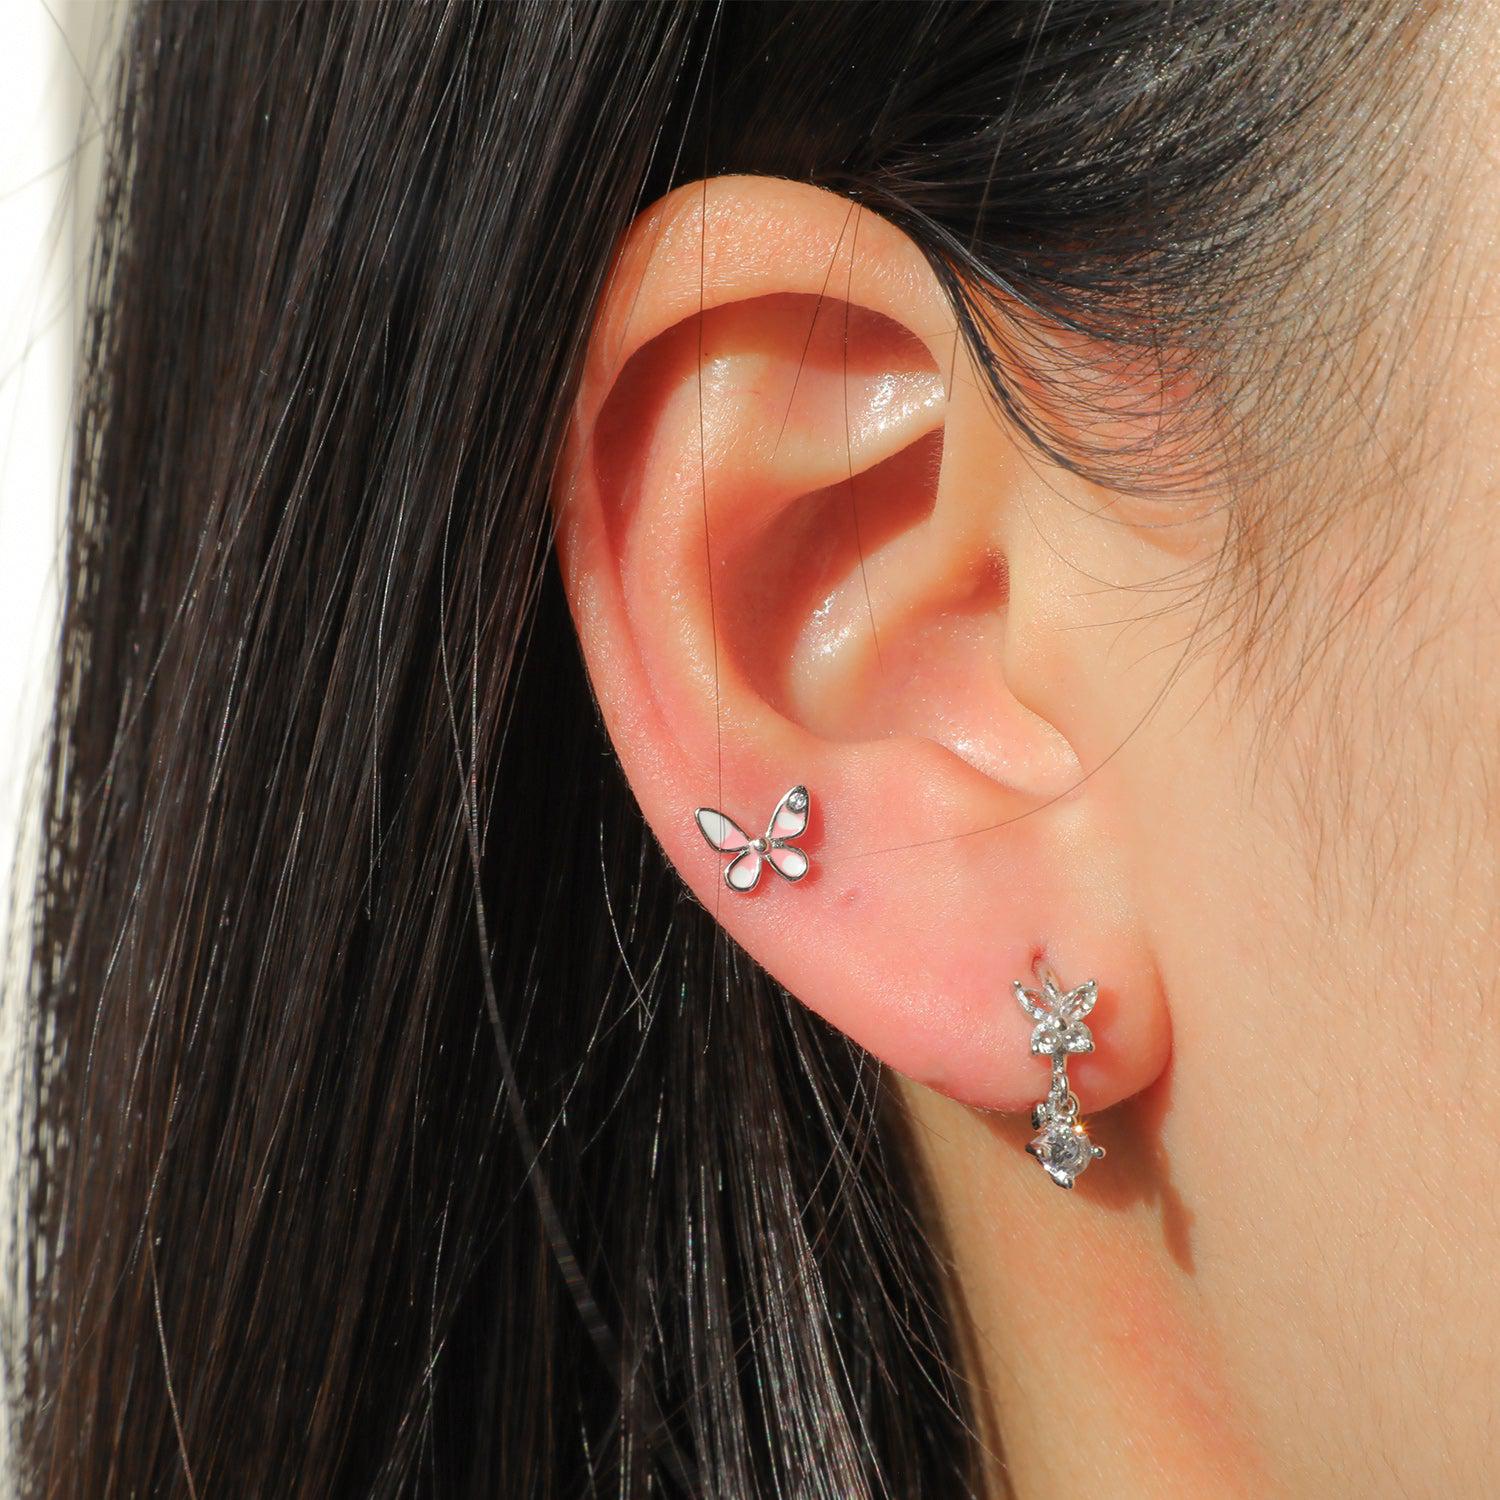 Tiny Pink Butterfly Earrings